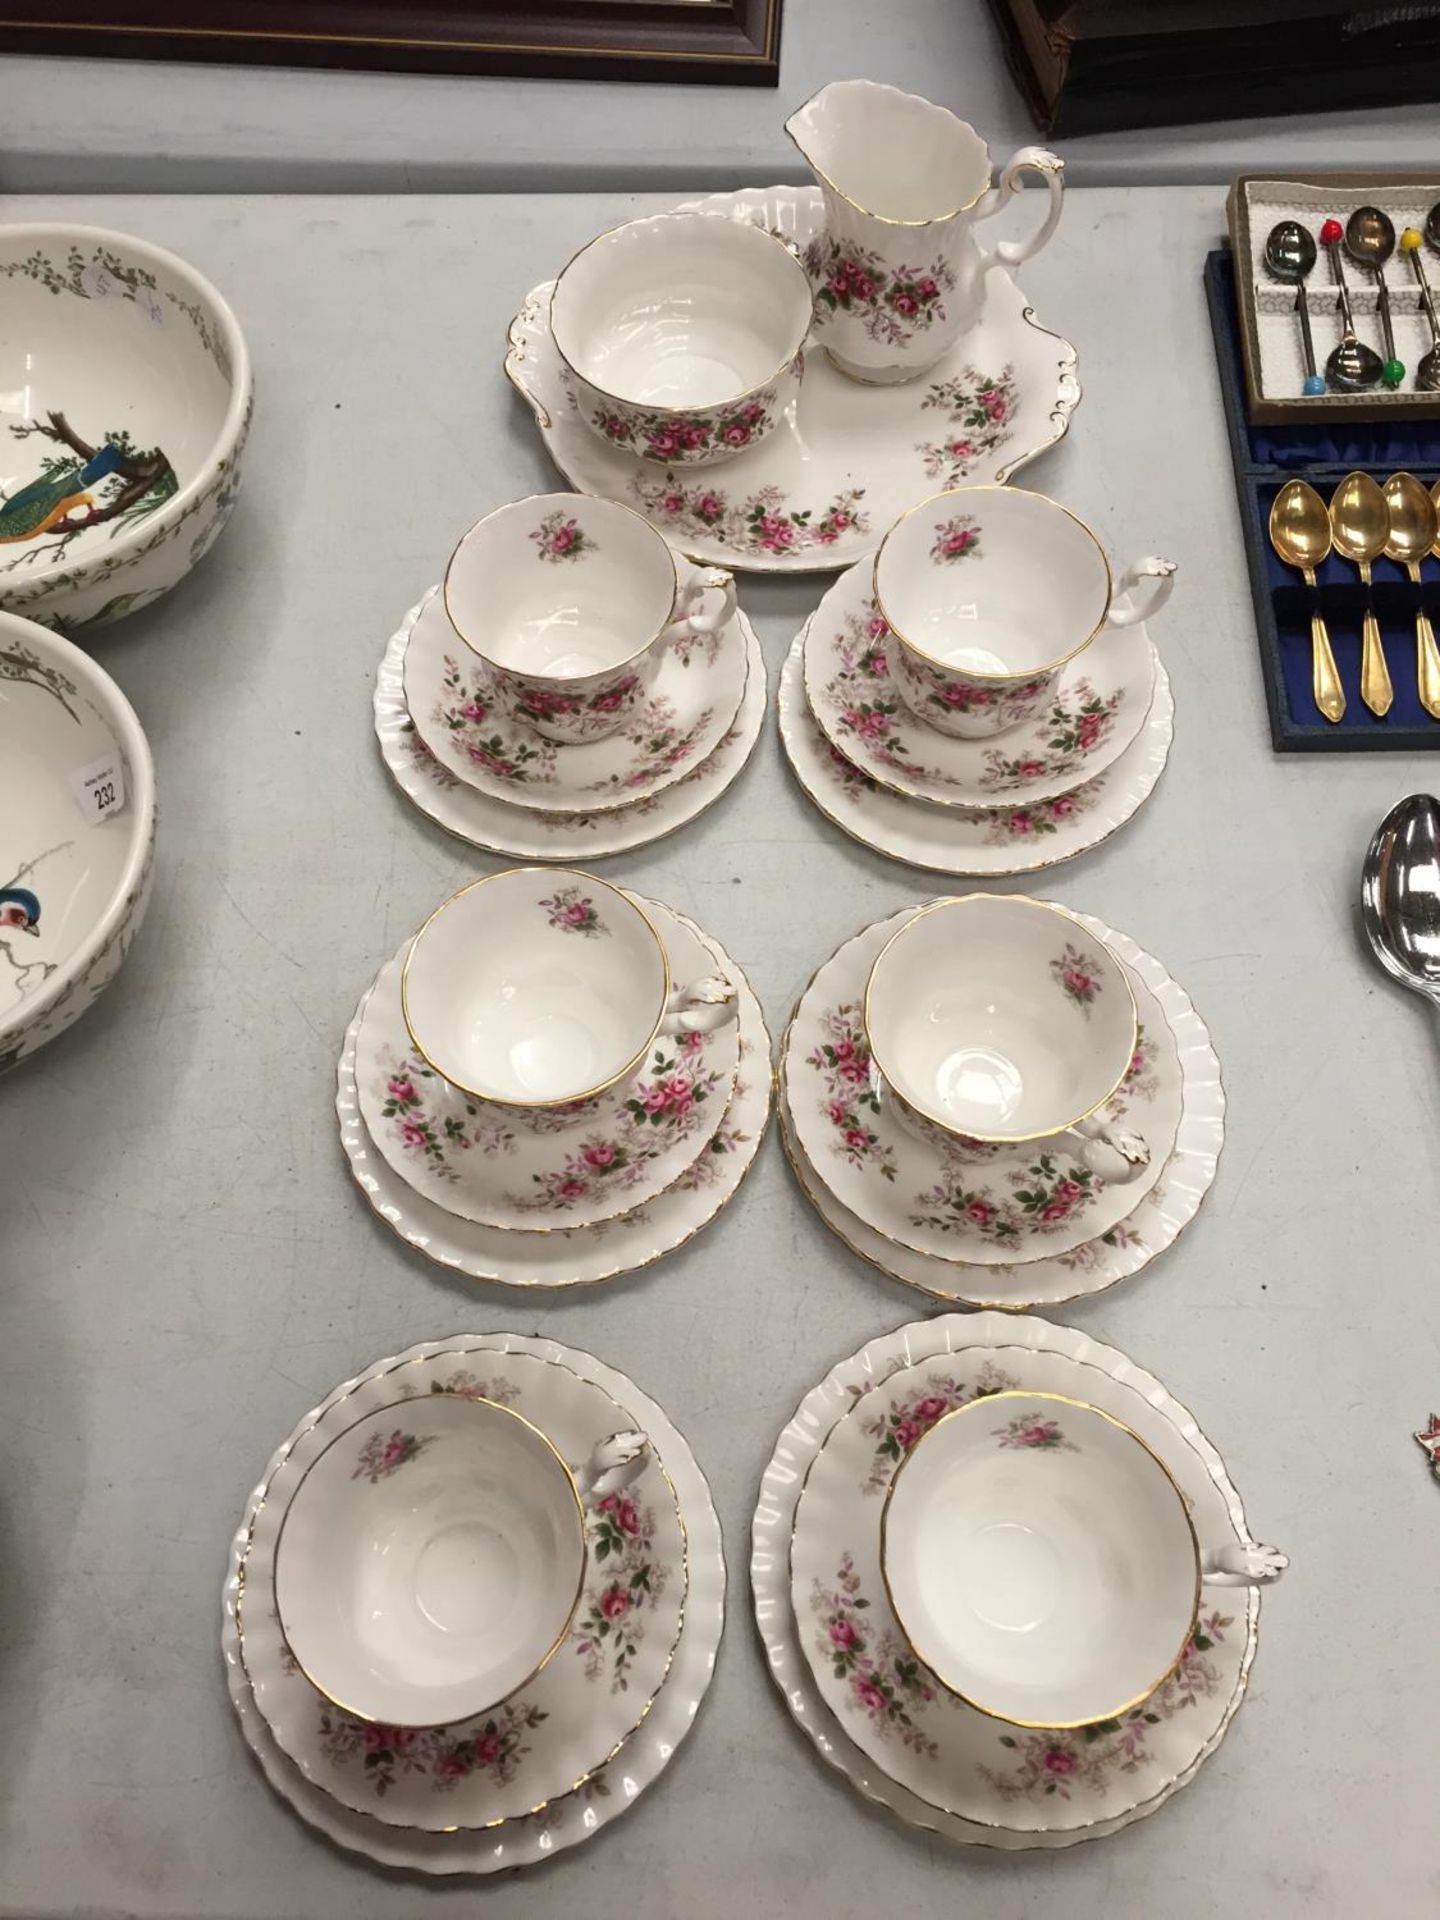 A COLLECTION OF ROYAL ALBERT CHINA "LAVENDER ROSE" TEA CUPS AND SAUCERS , SIDE PLATES, CAKE PLATE,